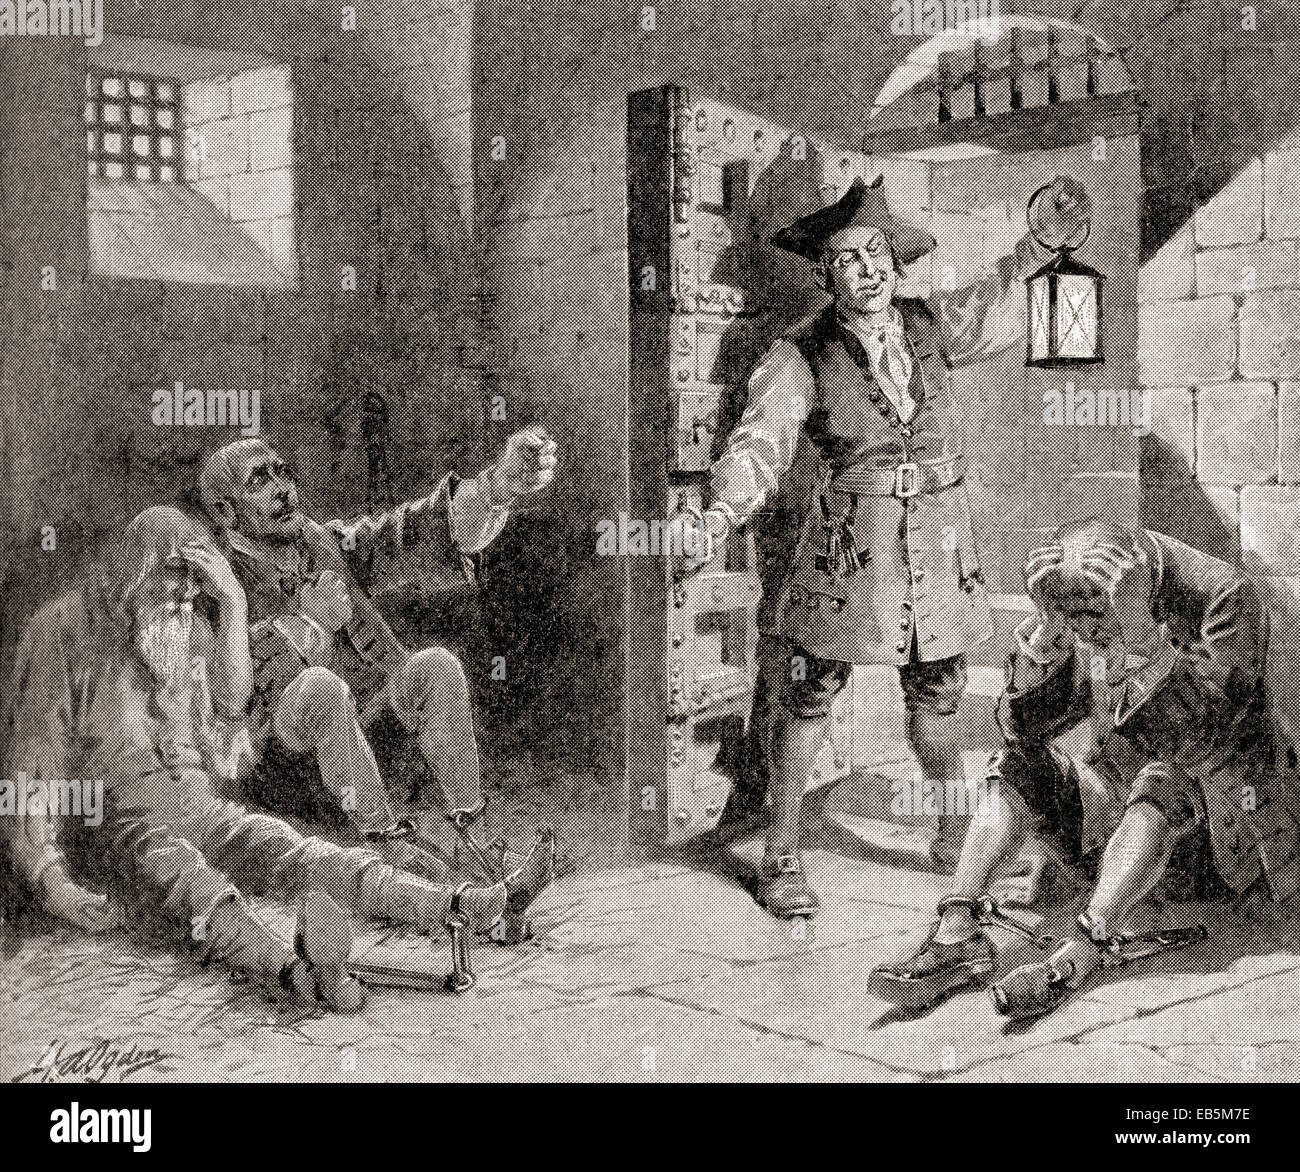 The horrors of English prison life in the 18th century.  From The History of Our Country, published 1900. Stock Photo